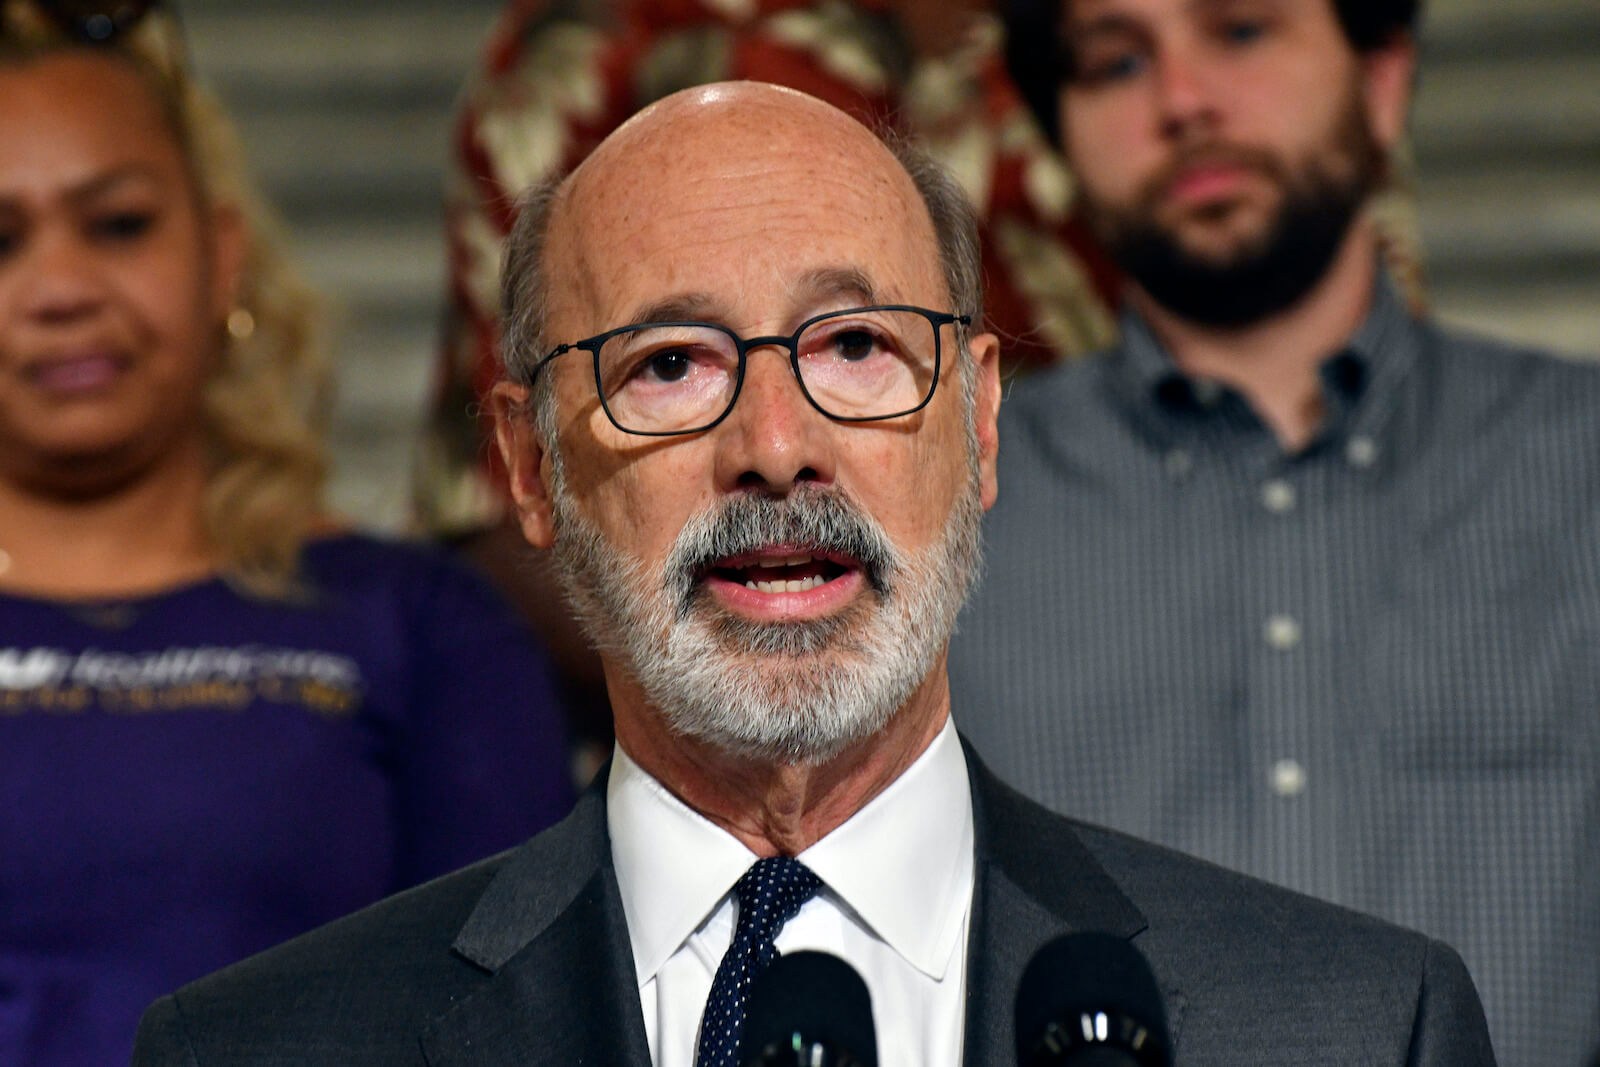 pennsylvania-governor-calls-for-more-stimulus-checks-says-it-s-mind-boggling-anyone-would